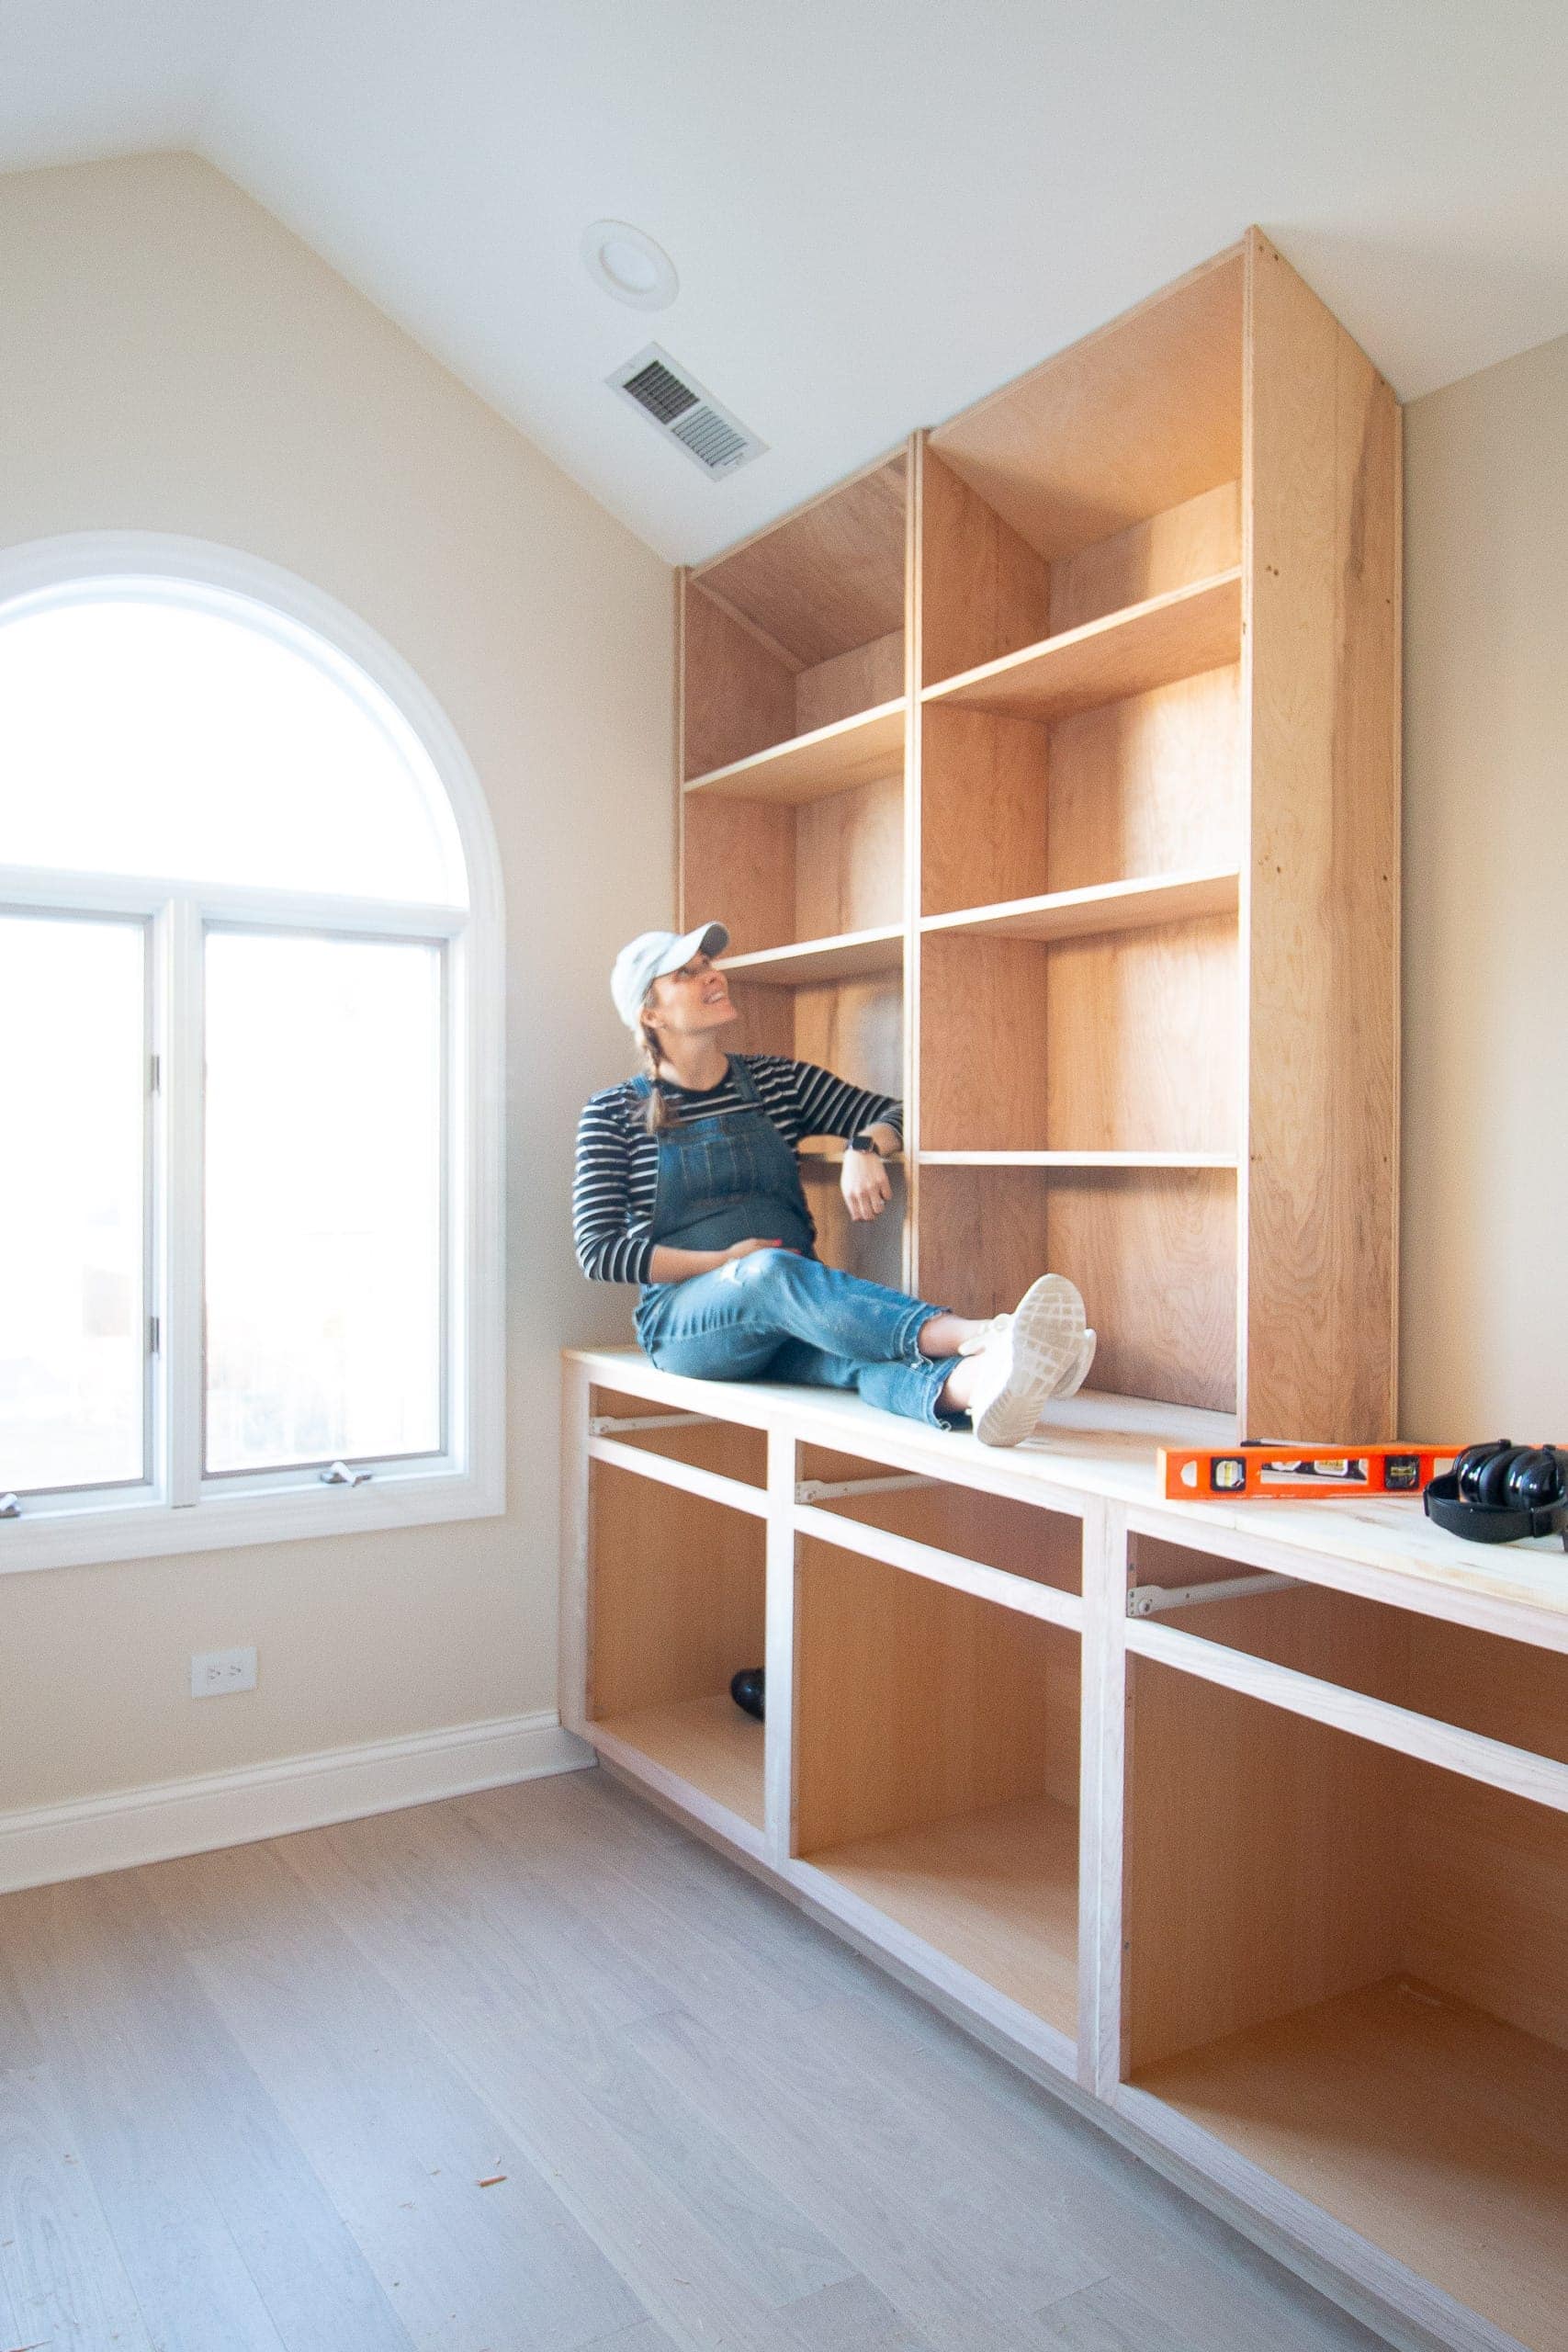 how to build diy bookshelves for built-ins | the diy playbook